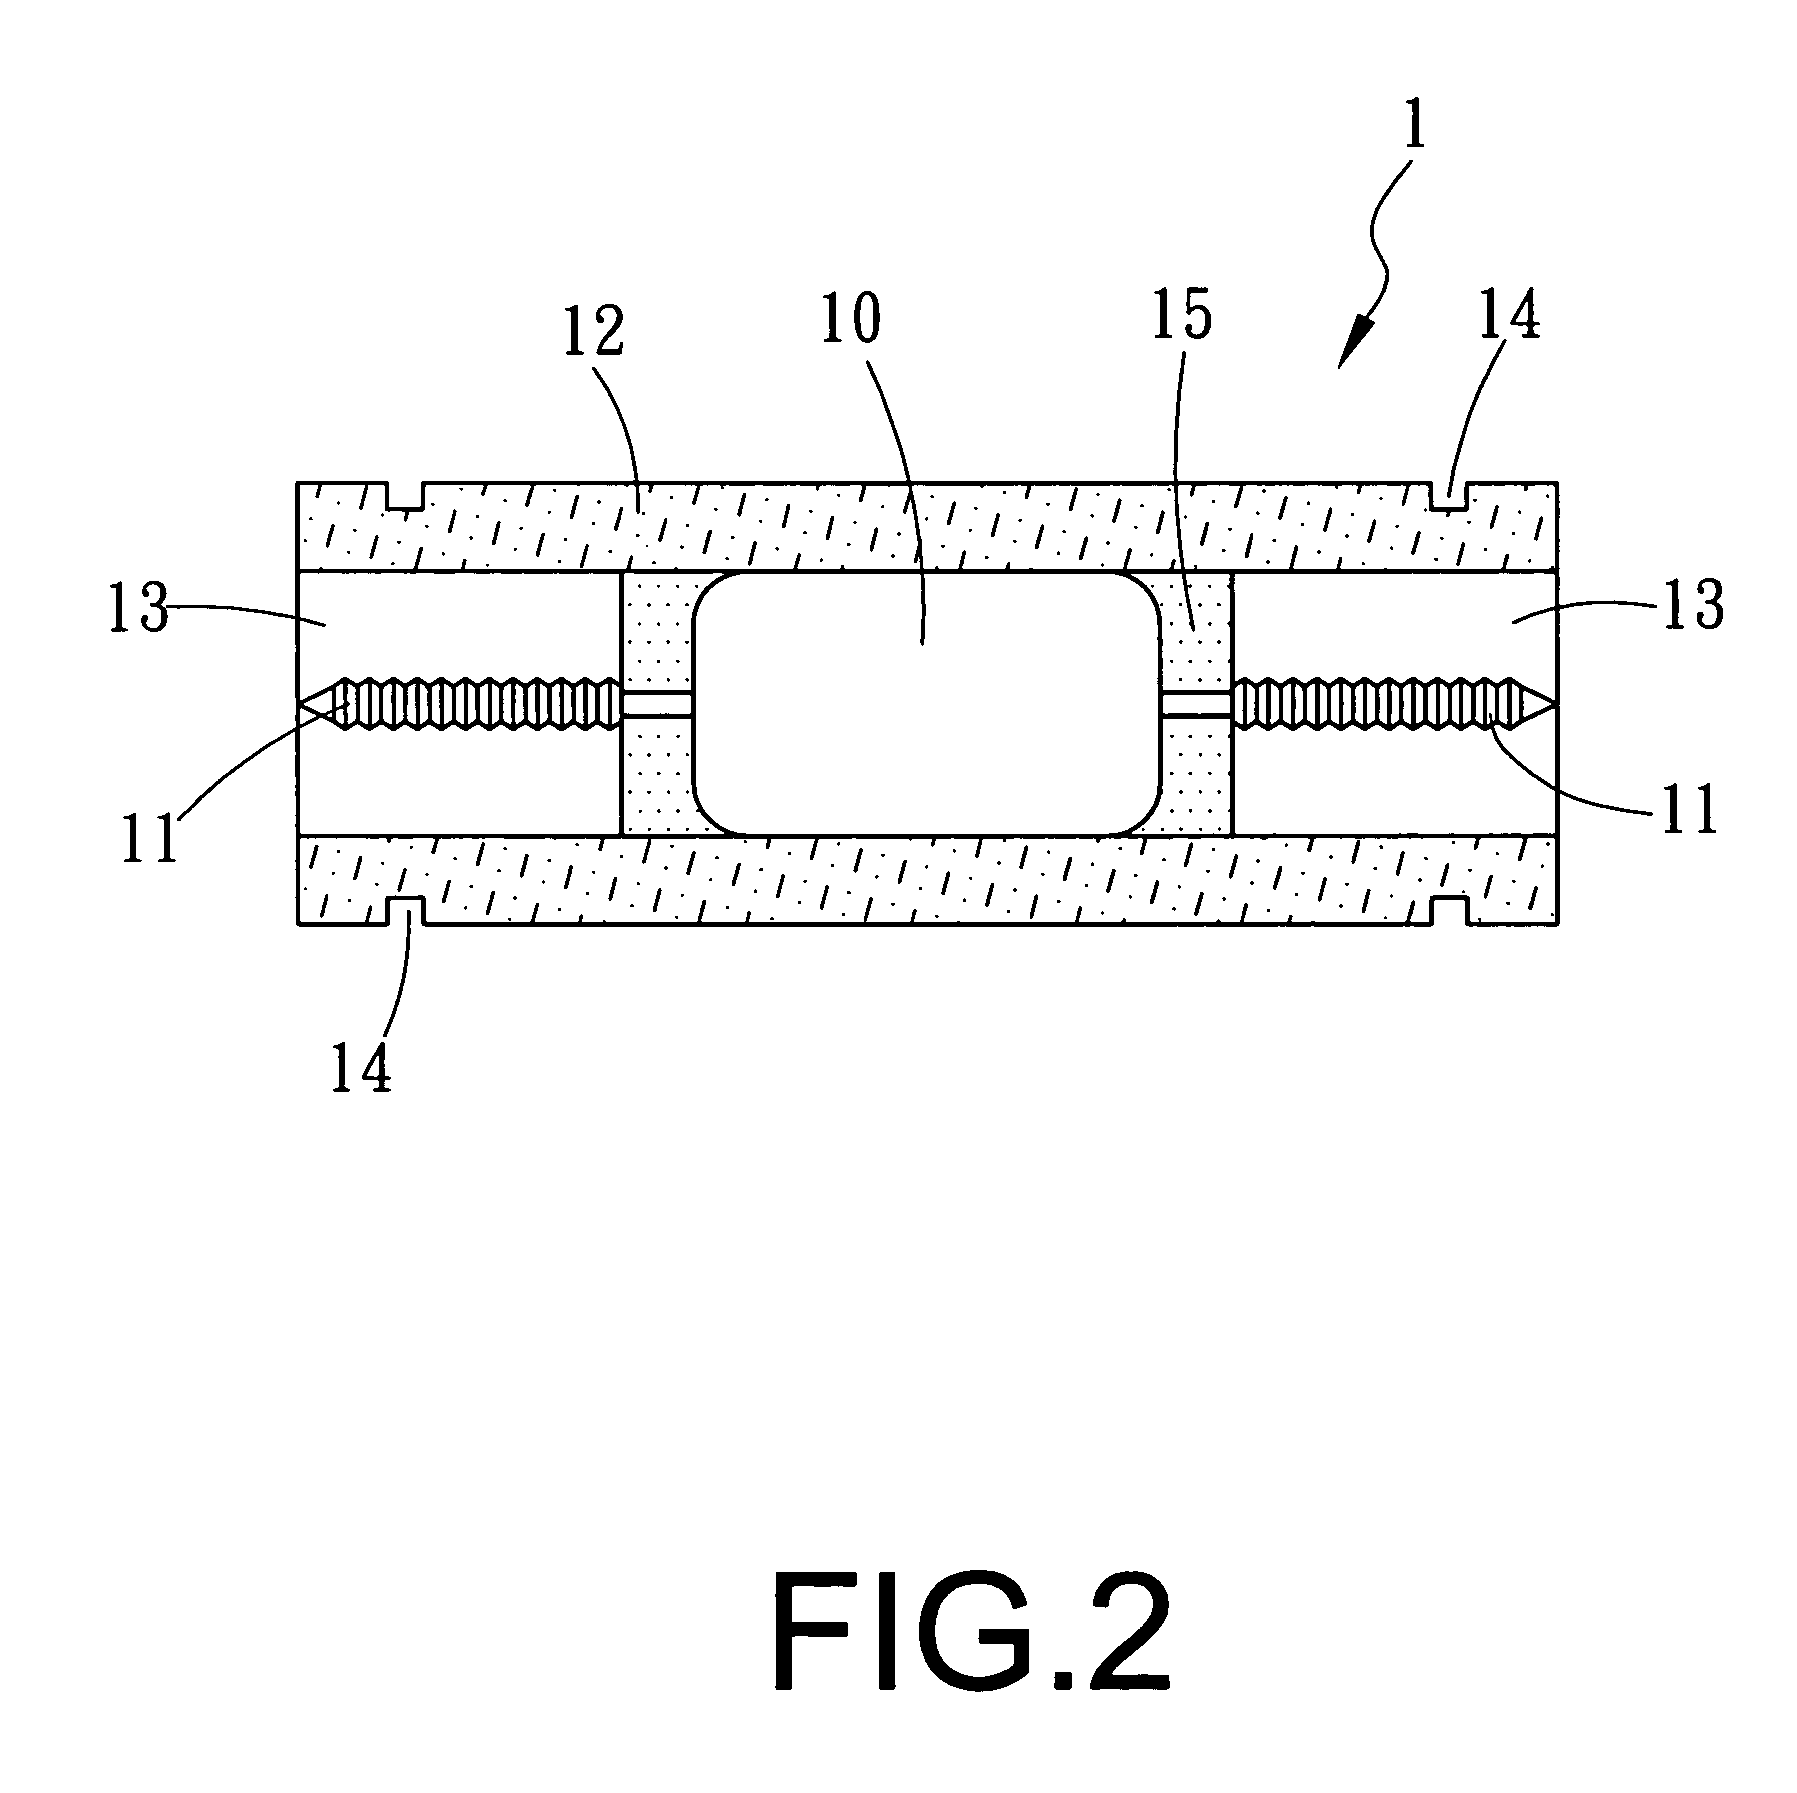 Ignition enhancement device for enhancing ignition efficiency of car engine